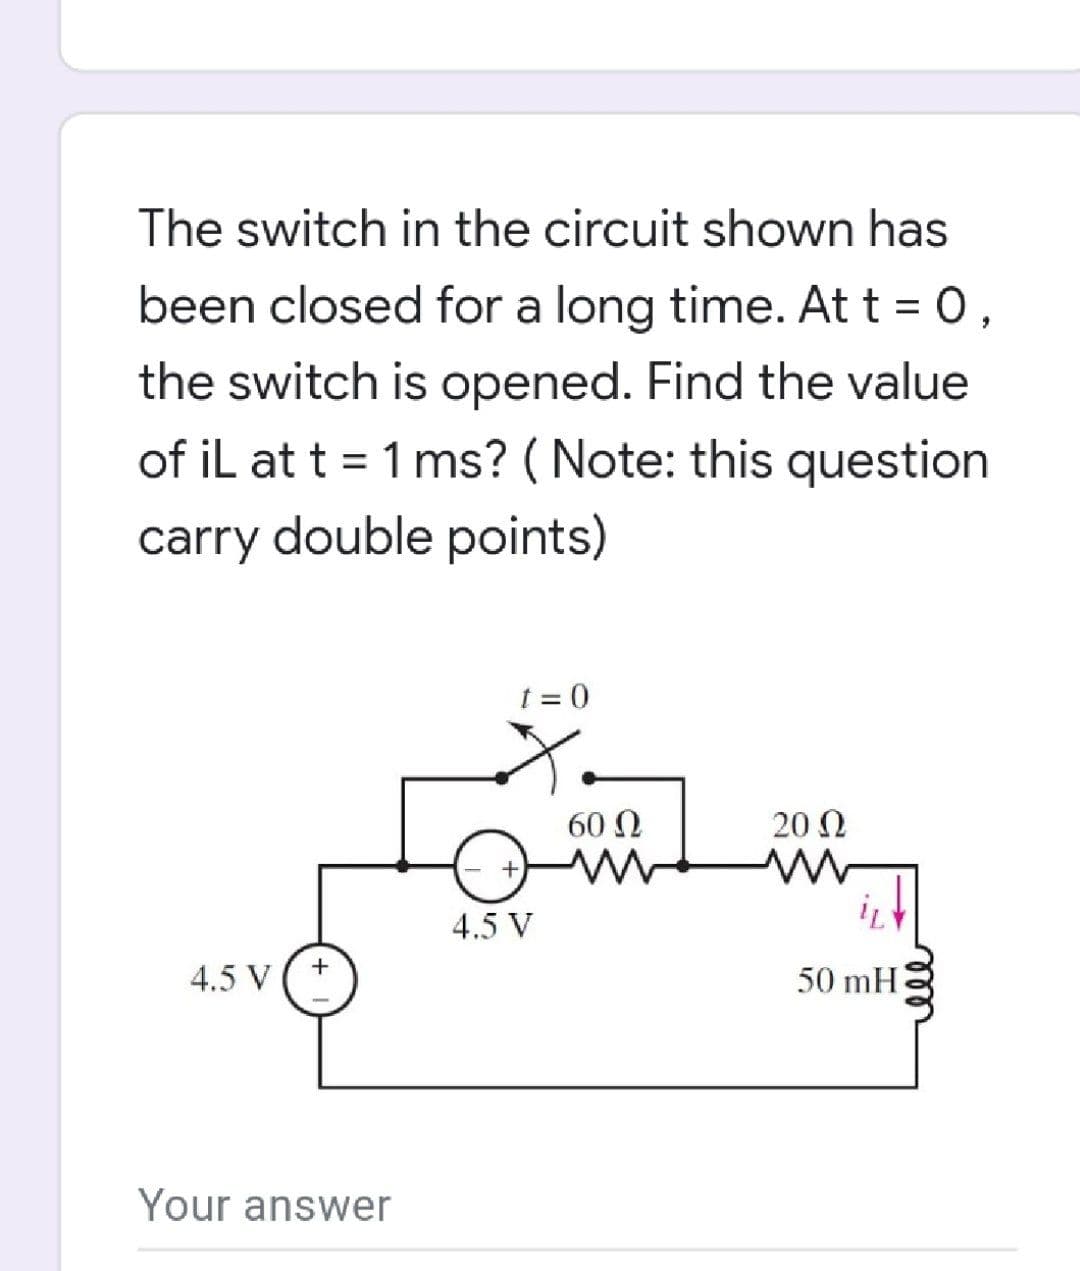 The switch in the circuit shown has
been closed for a long time. At t = 0,
the switch is opened. Find the value
of iL at t = 1 ms? ( Note: this question
%3D
carry double points)
t = 0
60 Ω
20 Ω
4.5 V
4.5 V
50 mH
Your answer
all
